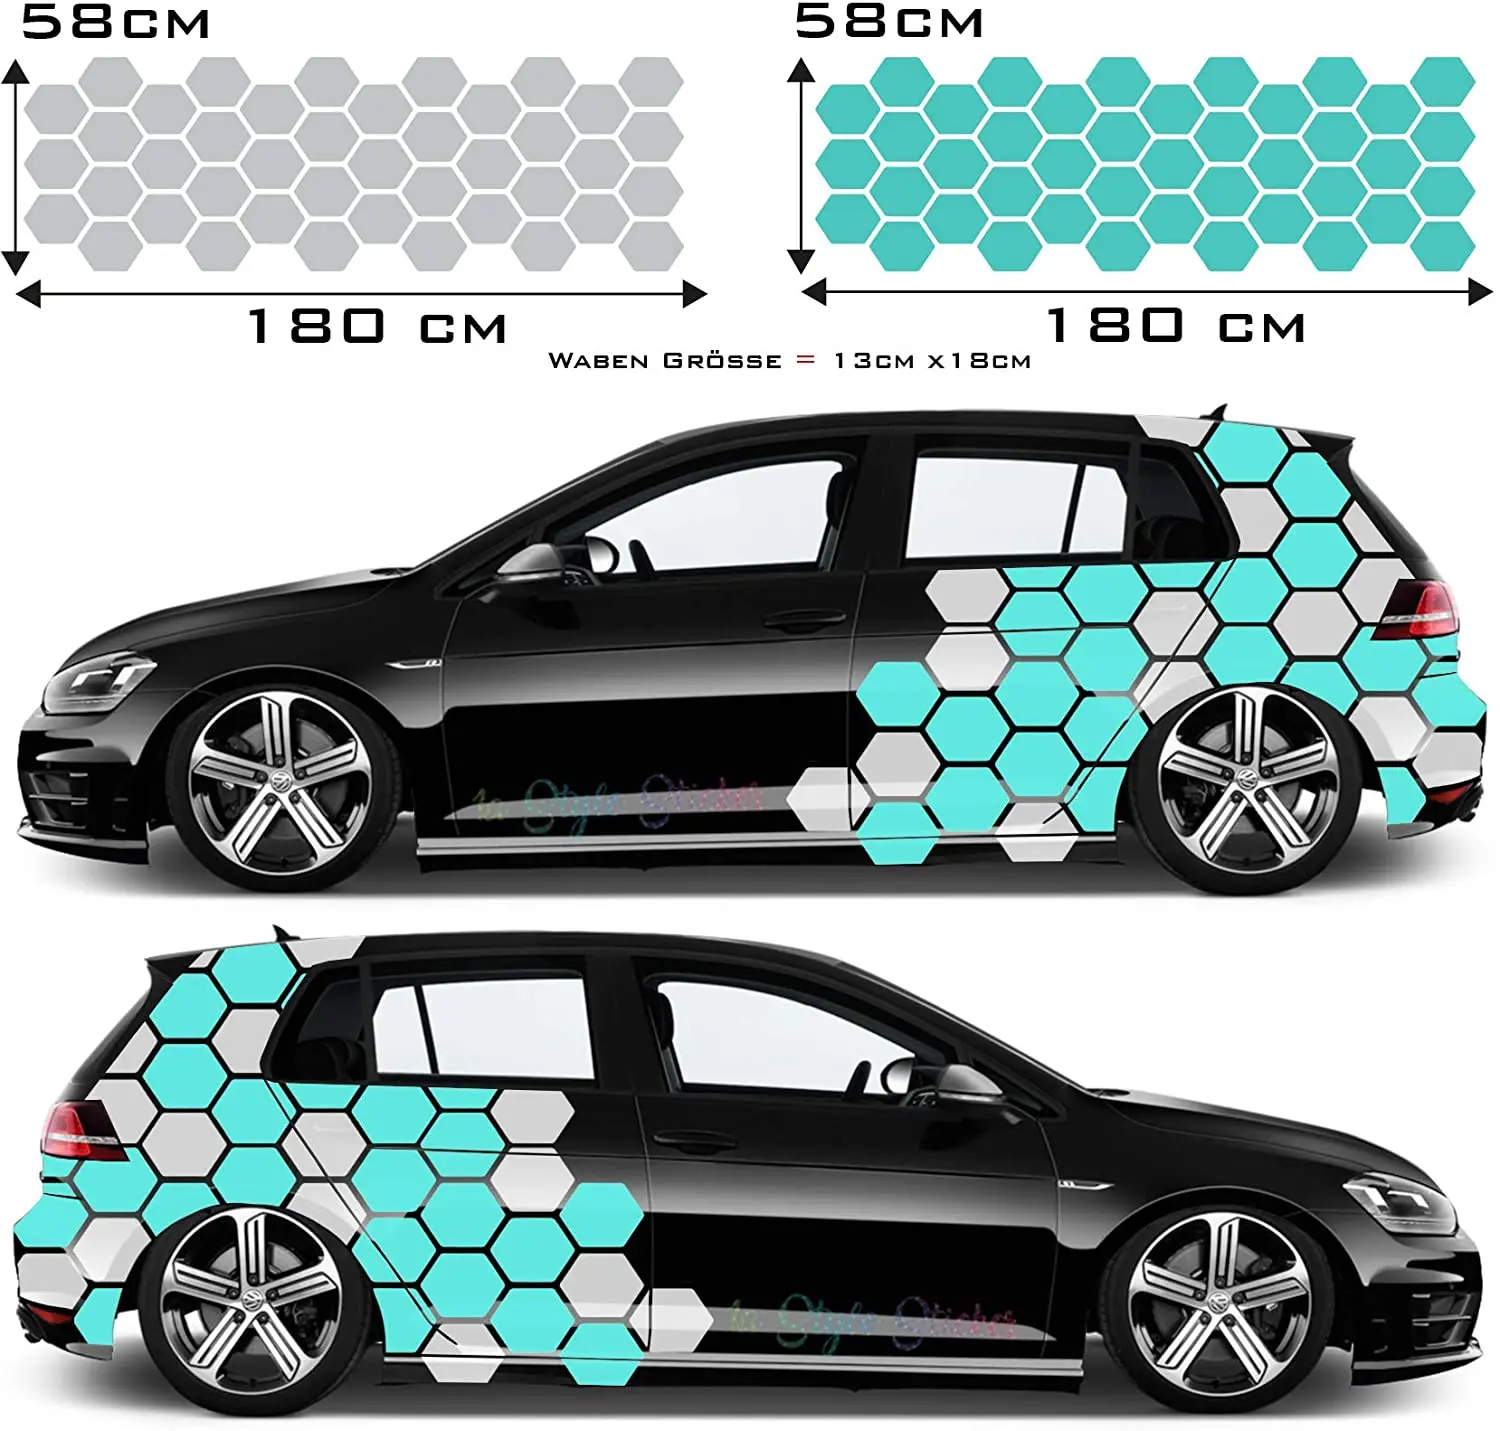 

1A style sticker car side sticker set hexagon honeycomb 84 pieces for passenger & driver side car stickers